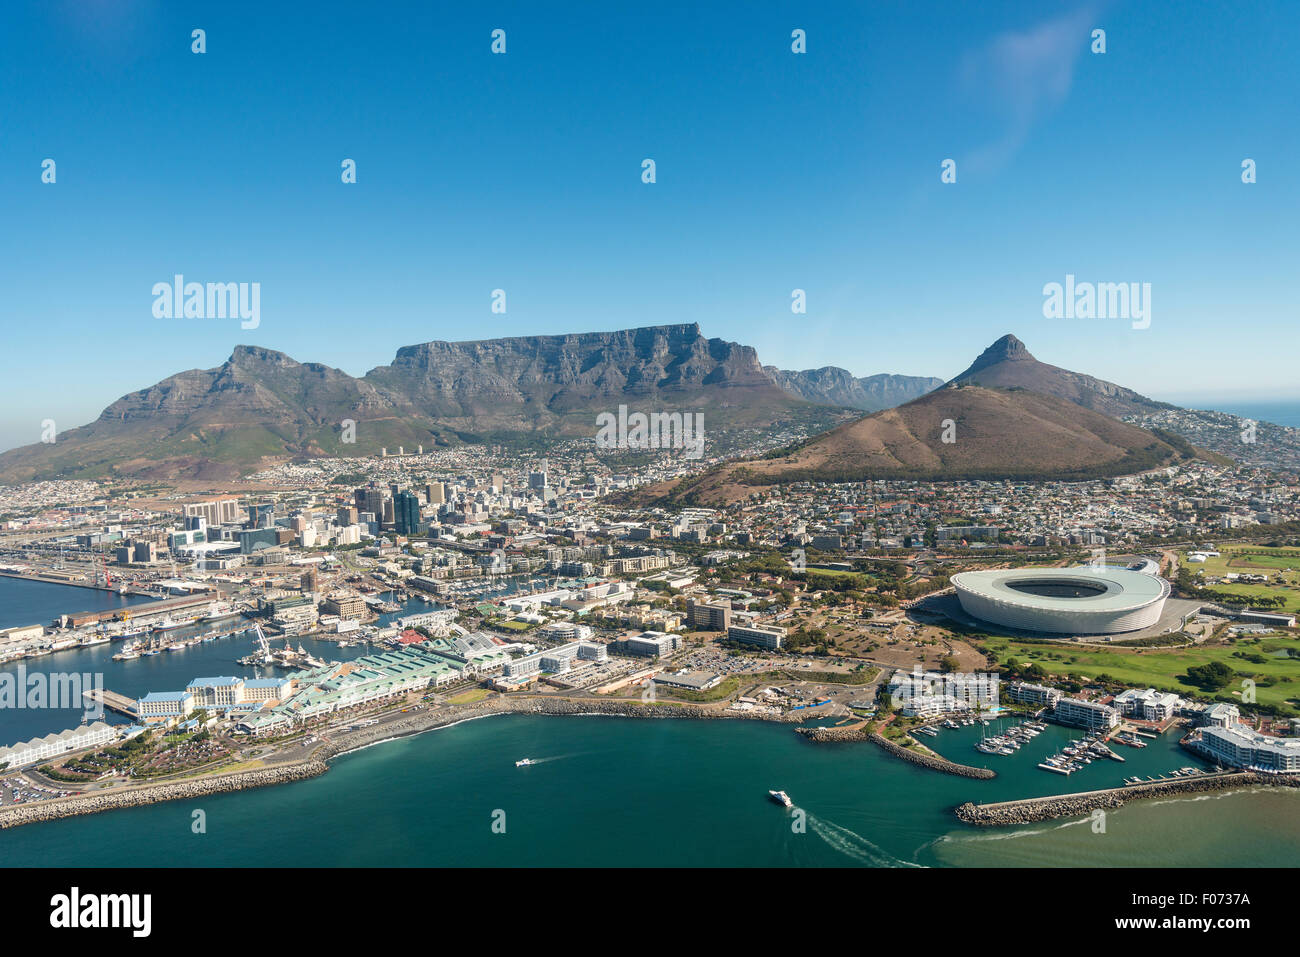 Aerial view of Cape Town, Western Cape Province, Republic of South Africa Stock Photo